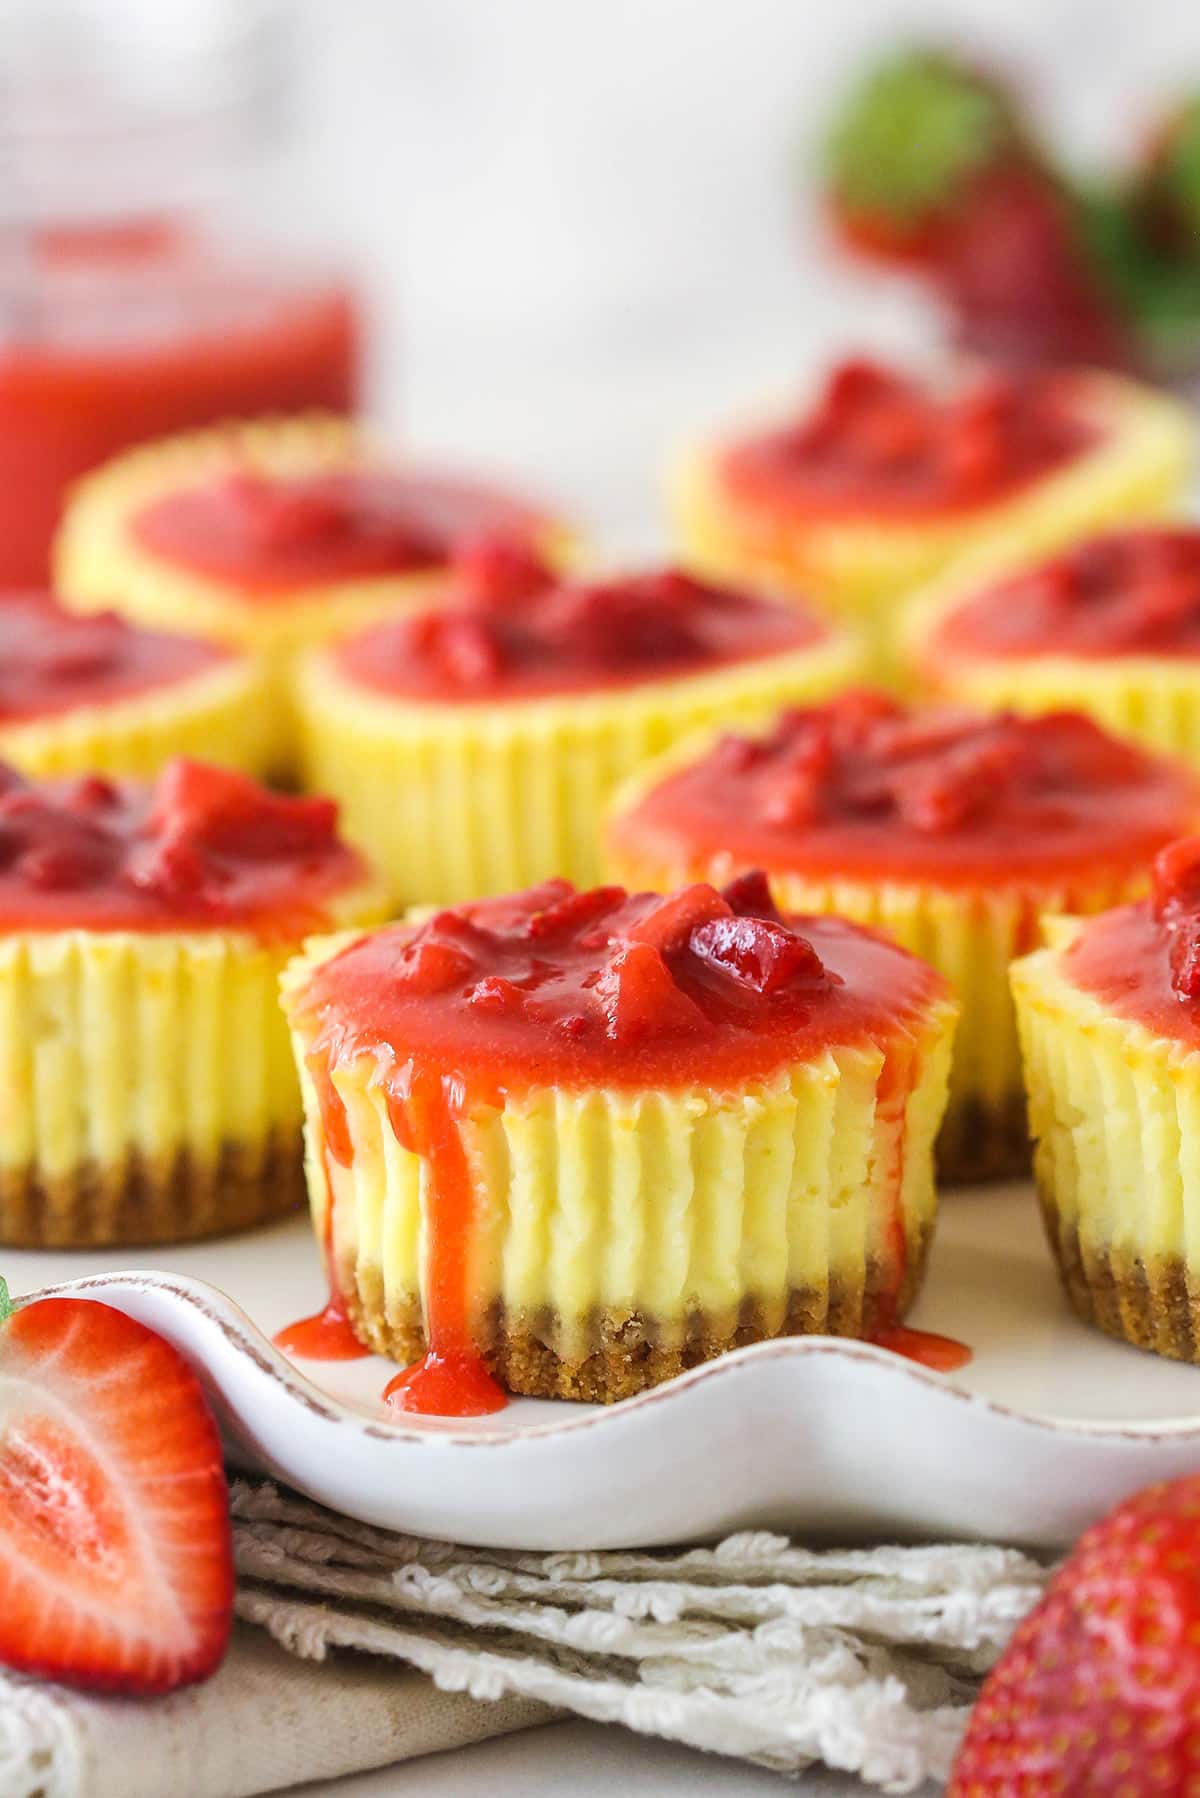 Mini strawberry cheesecakes with sauce dripping down the sides.